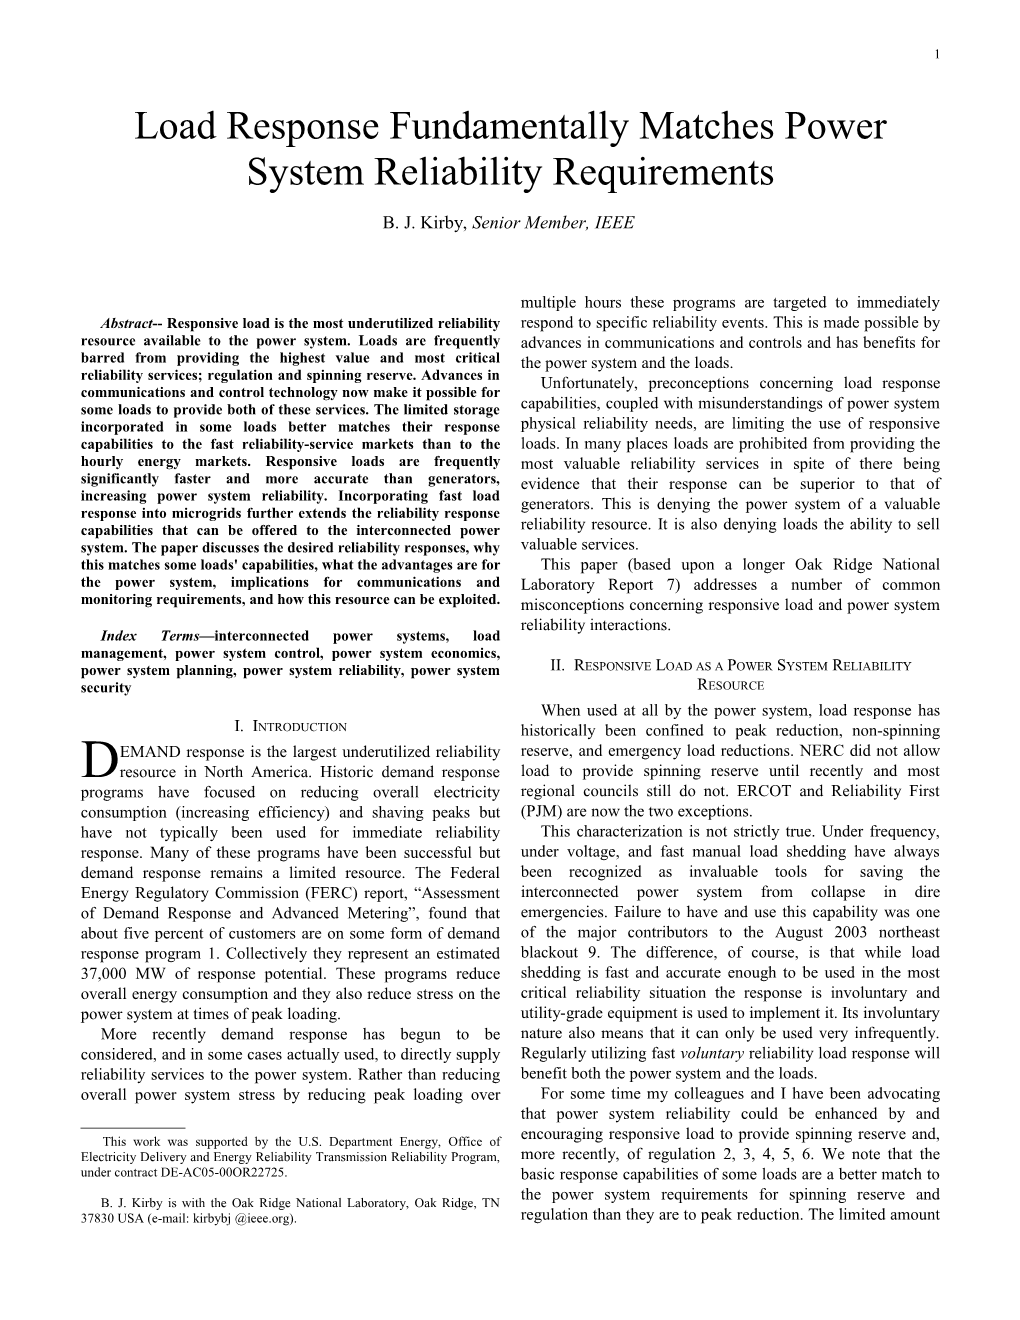 Load Response Fundamentally Matches Power System Reliability Requirements